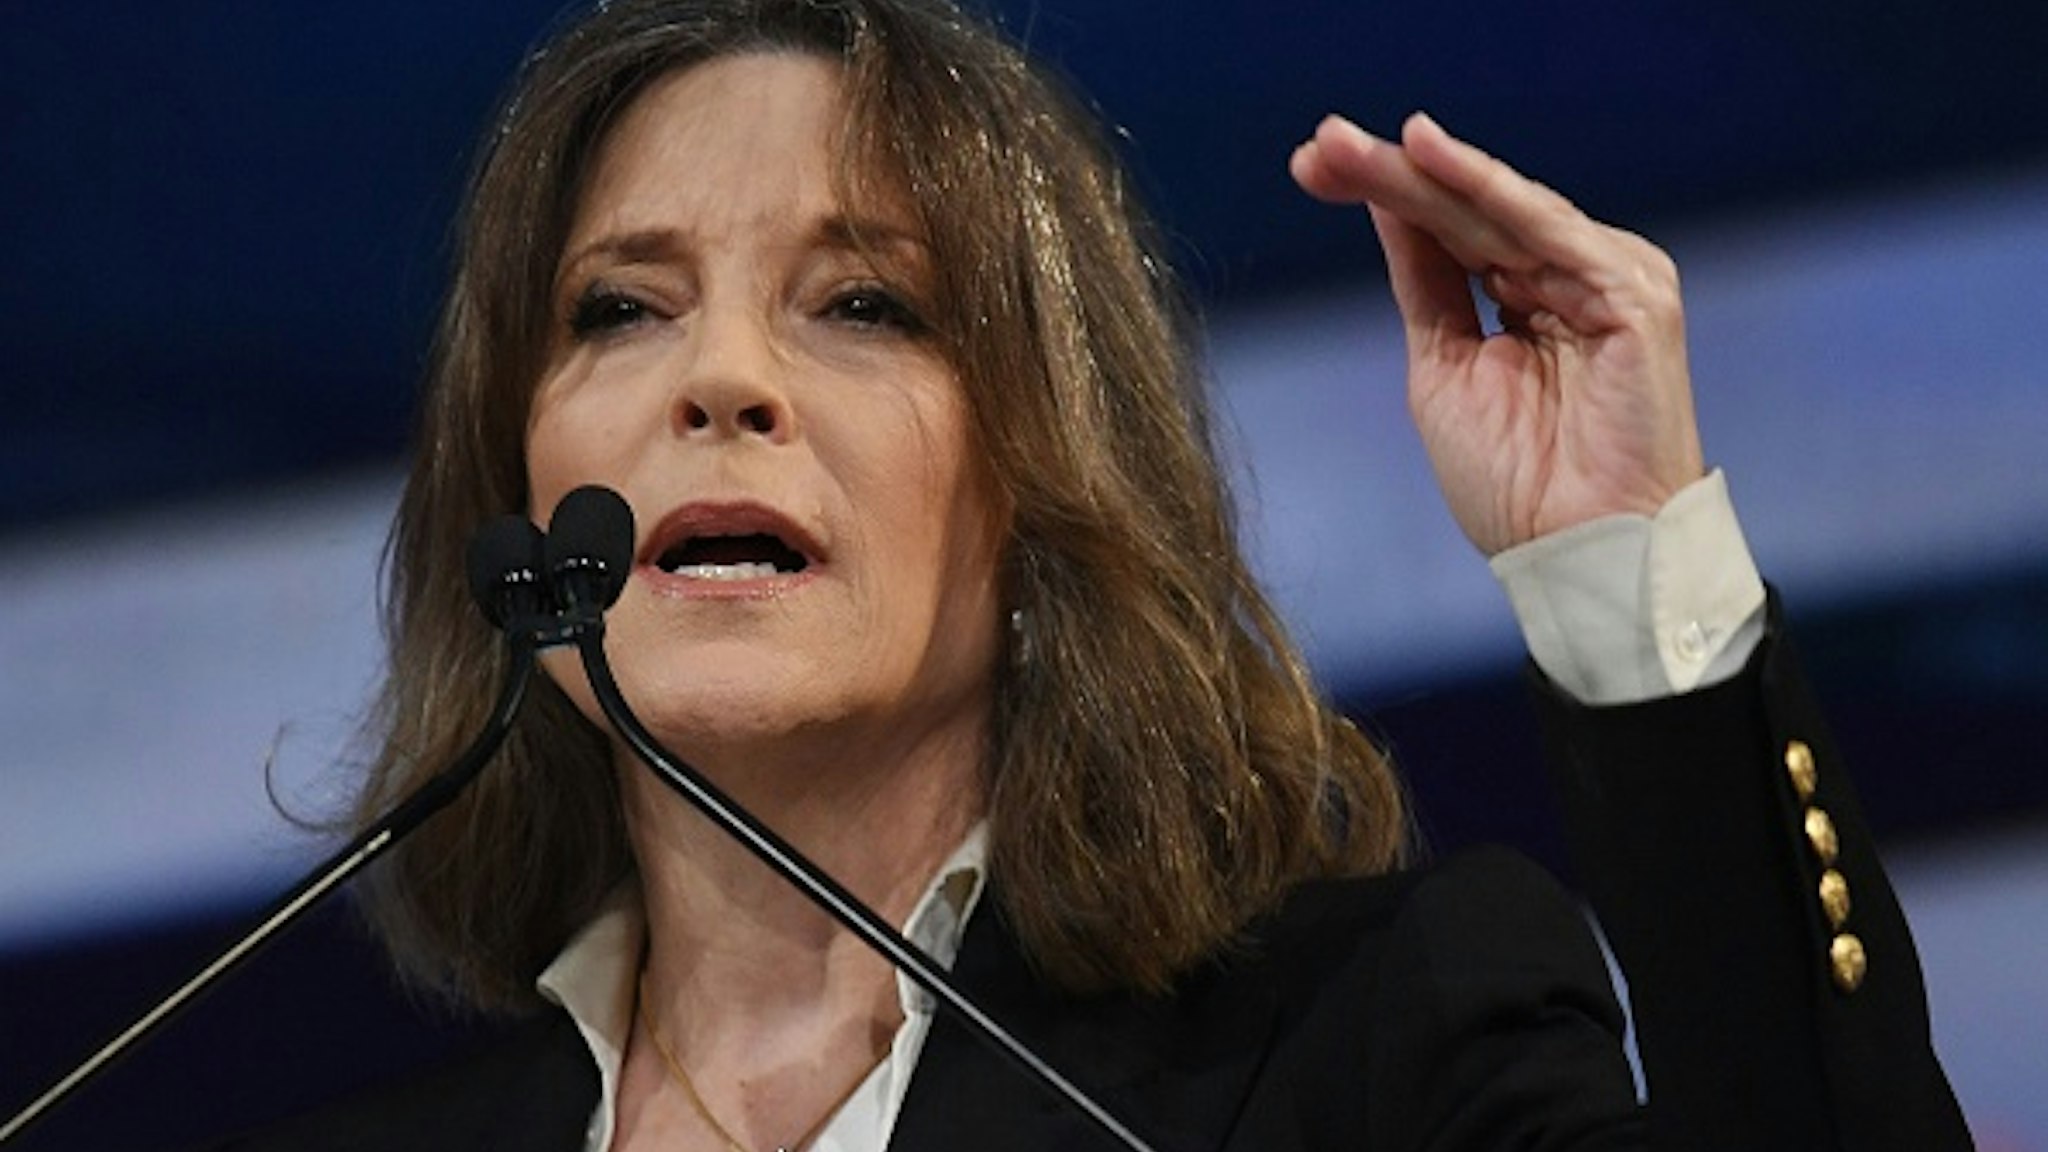 Democratic Presidential hopeful Marianne Williamson speaks at the California Democratic Party 2019 Fall Endorsing Convention in Long Beach, California on November 16, 2019.